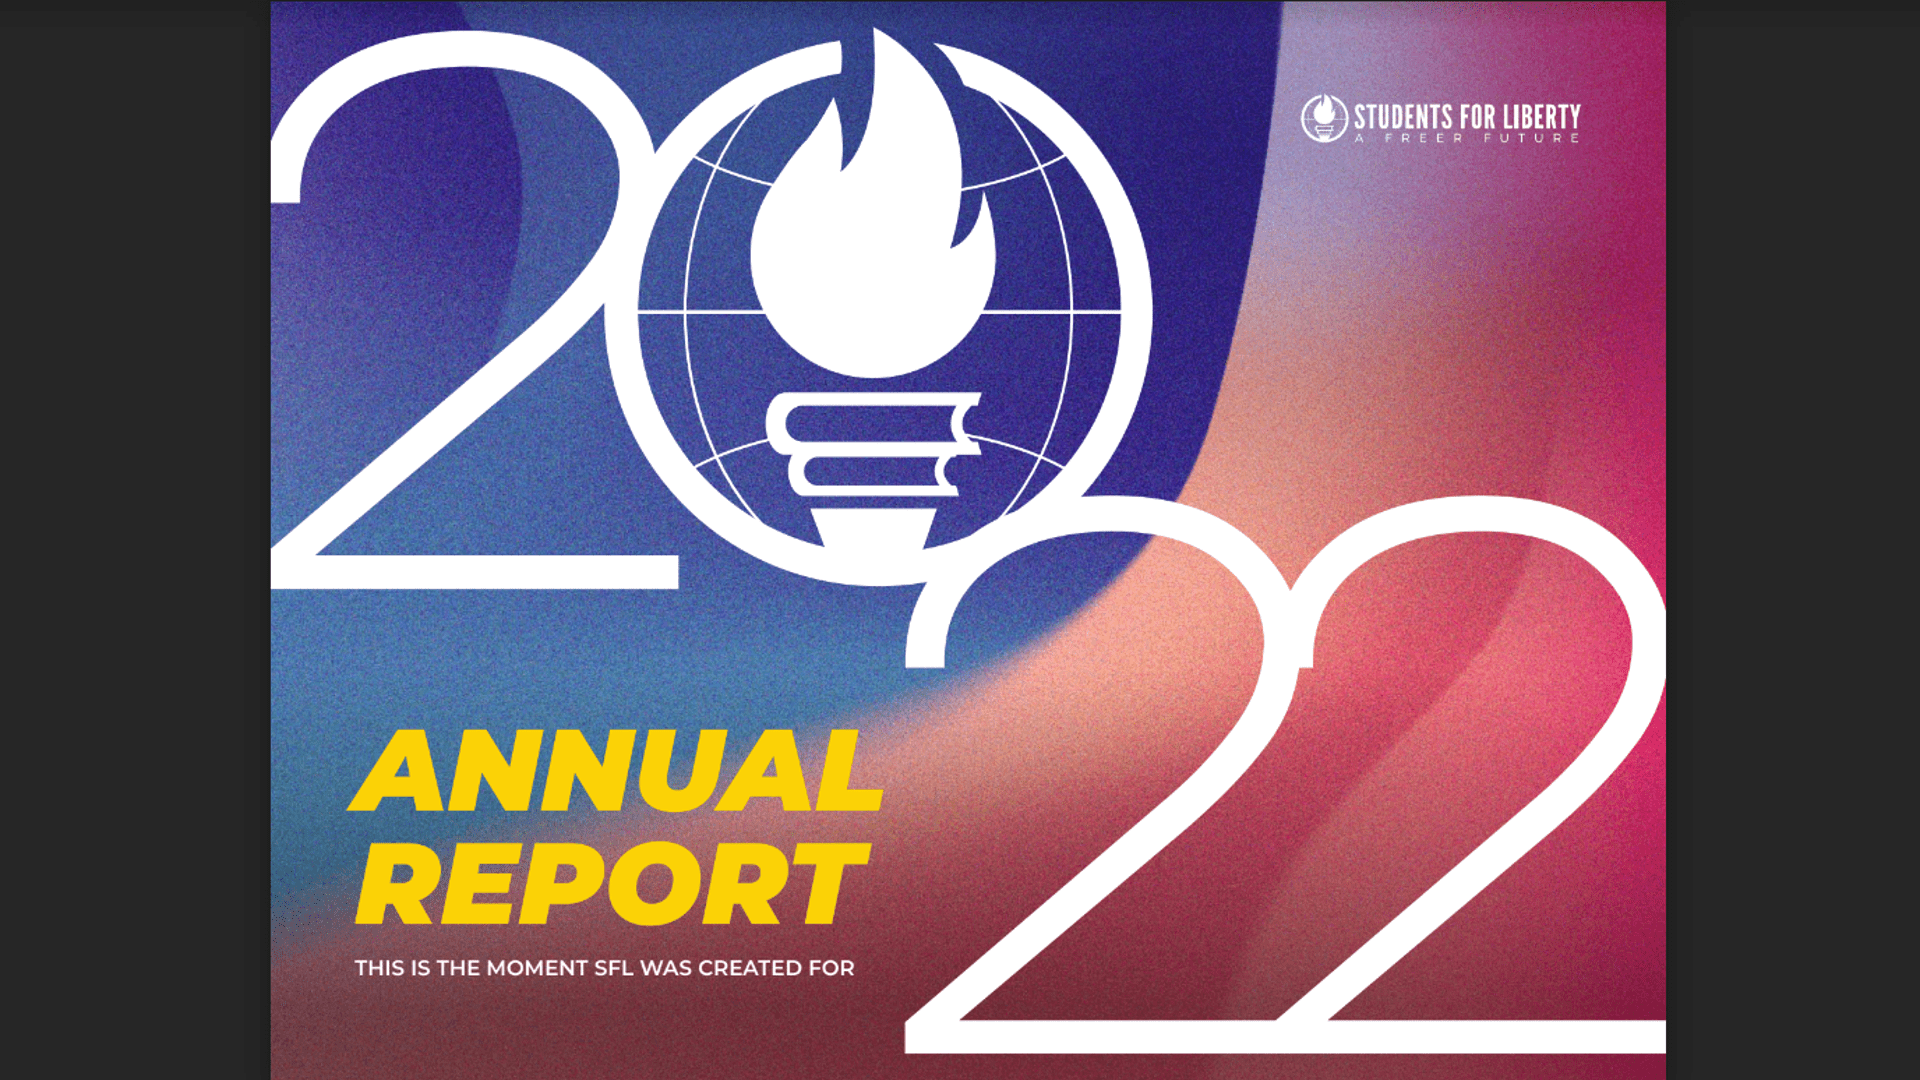 Students For Liberty's Annual Report highlights how economic uncertainty and political corruption motivate young people to stand up